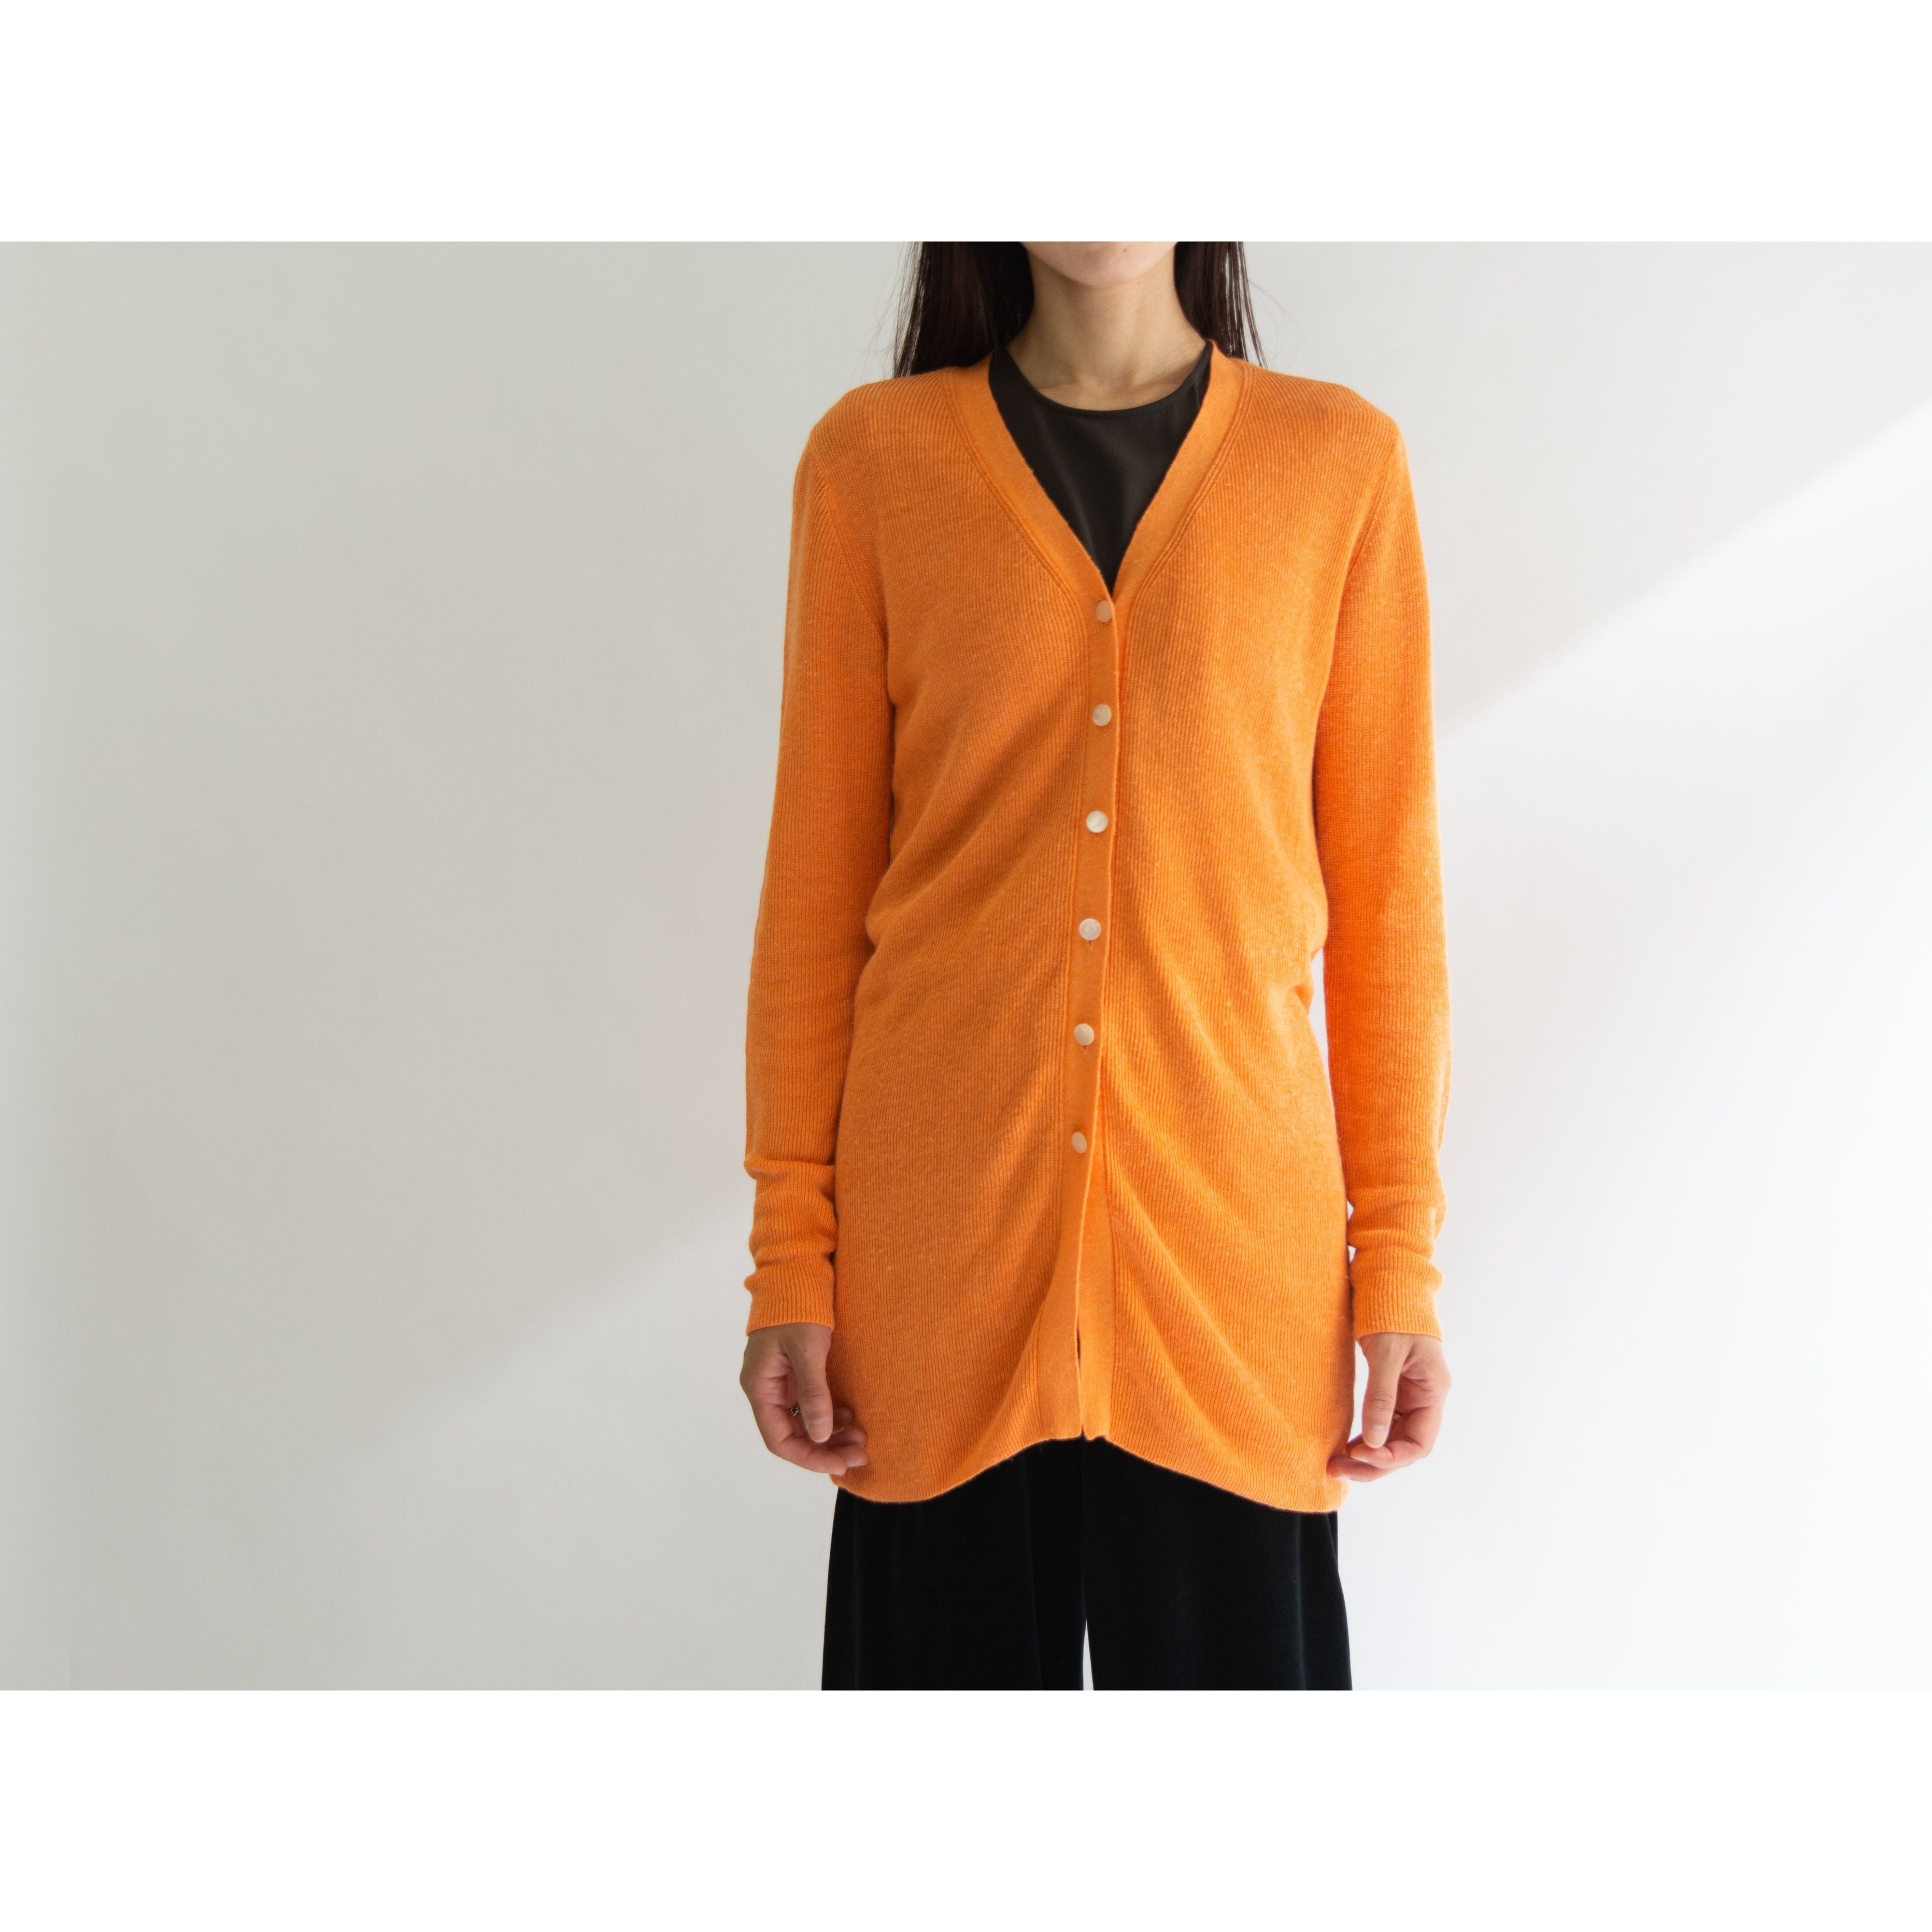 VAL by VALENTINO】 Made in China Linen-Rayon Cardigan（バル バイ